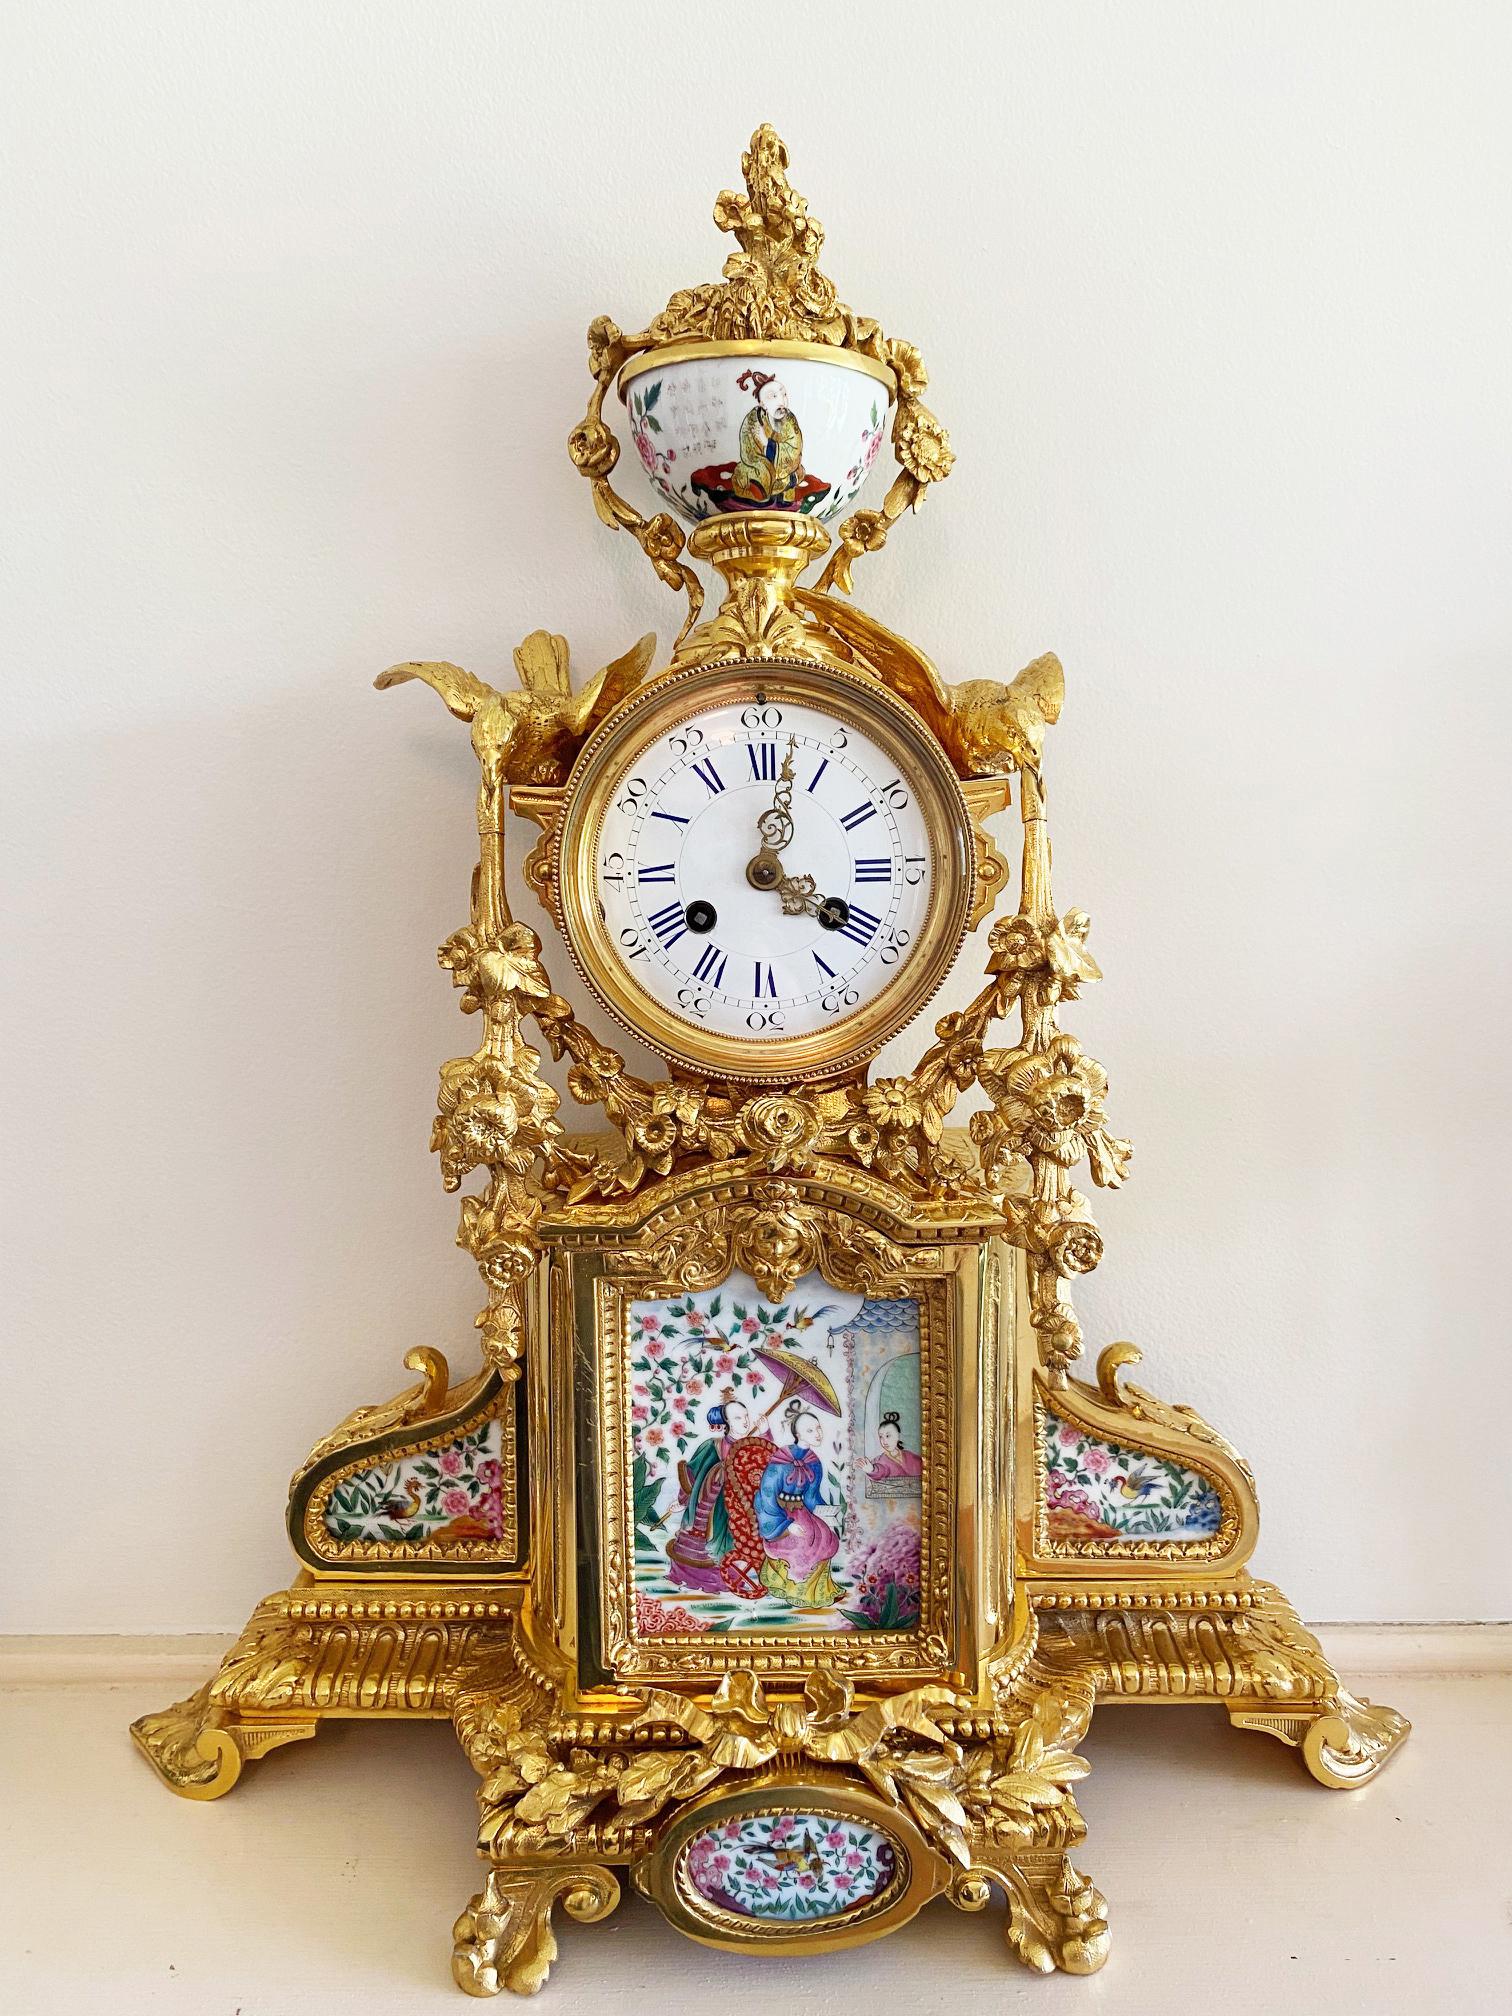 A very attractive French gilt bronze and ceramic mantel clock, profusely decorated with  floral swags, flowers, ribbons, birds and masks and surmounted by a ceramic and bronze baroque style urn swathed in fruit and flowers. The original gilding in